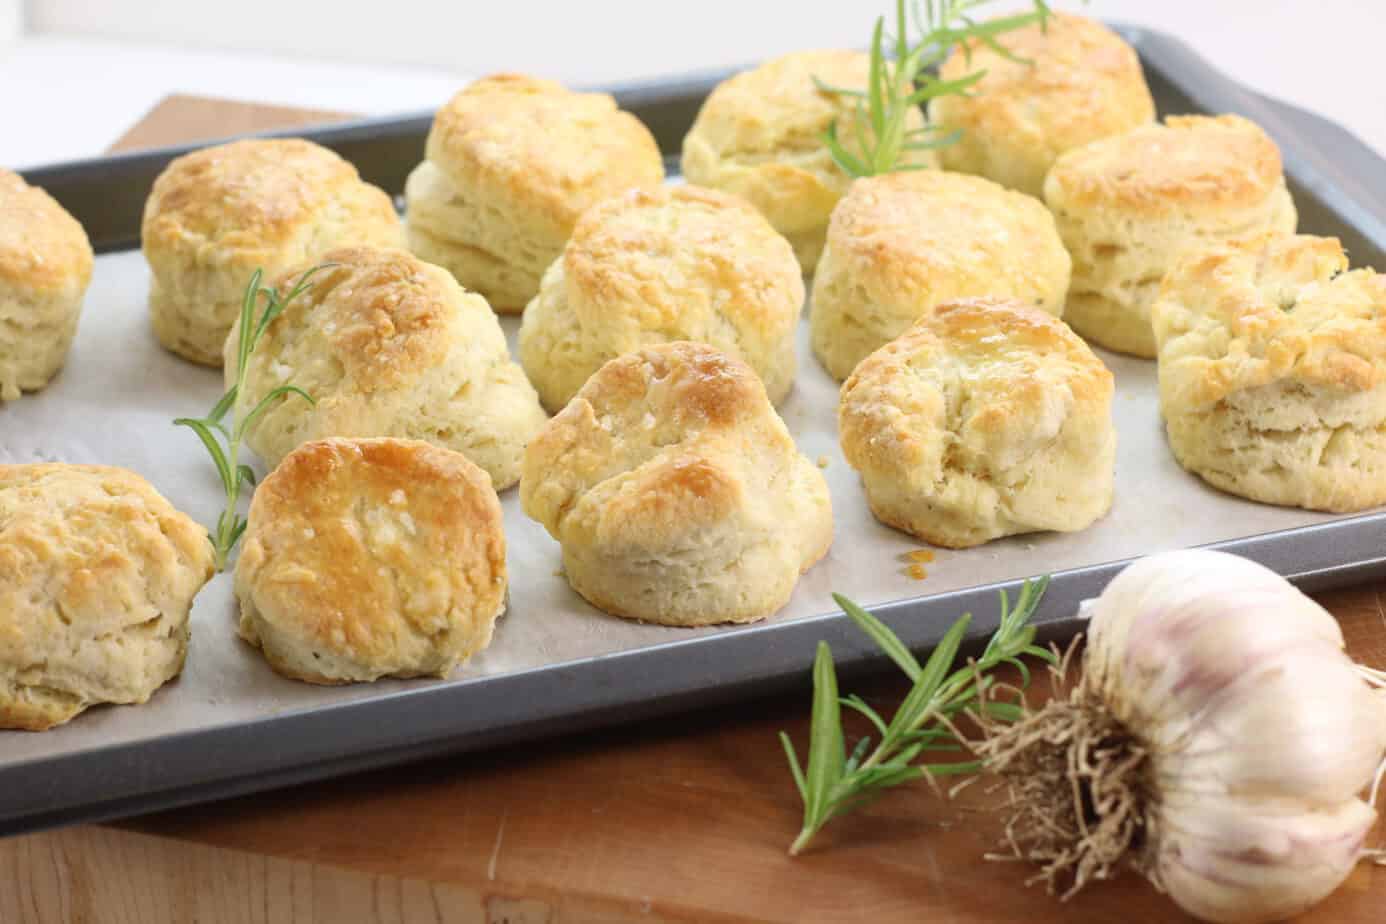 Freshly baked rosemary and garlic biscuits on a sheet tray.